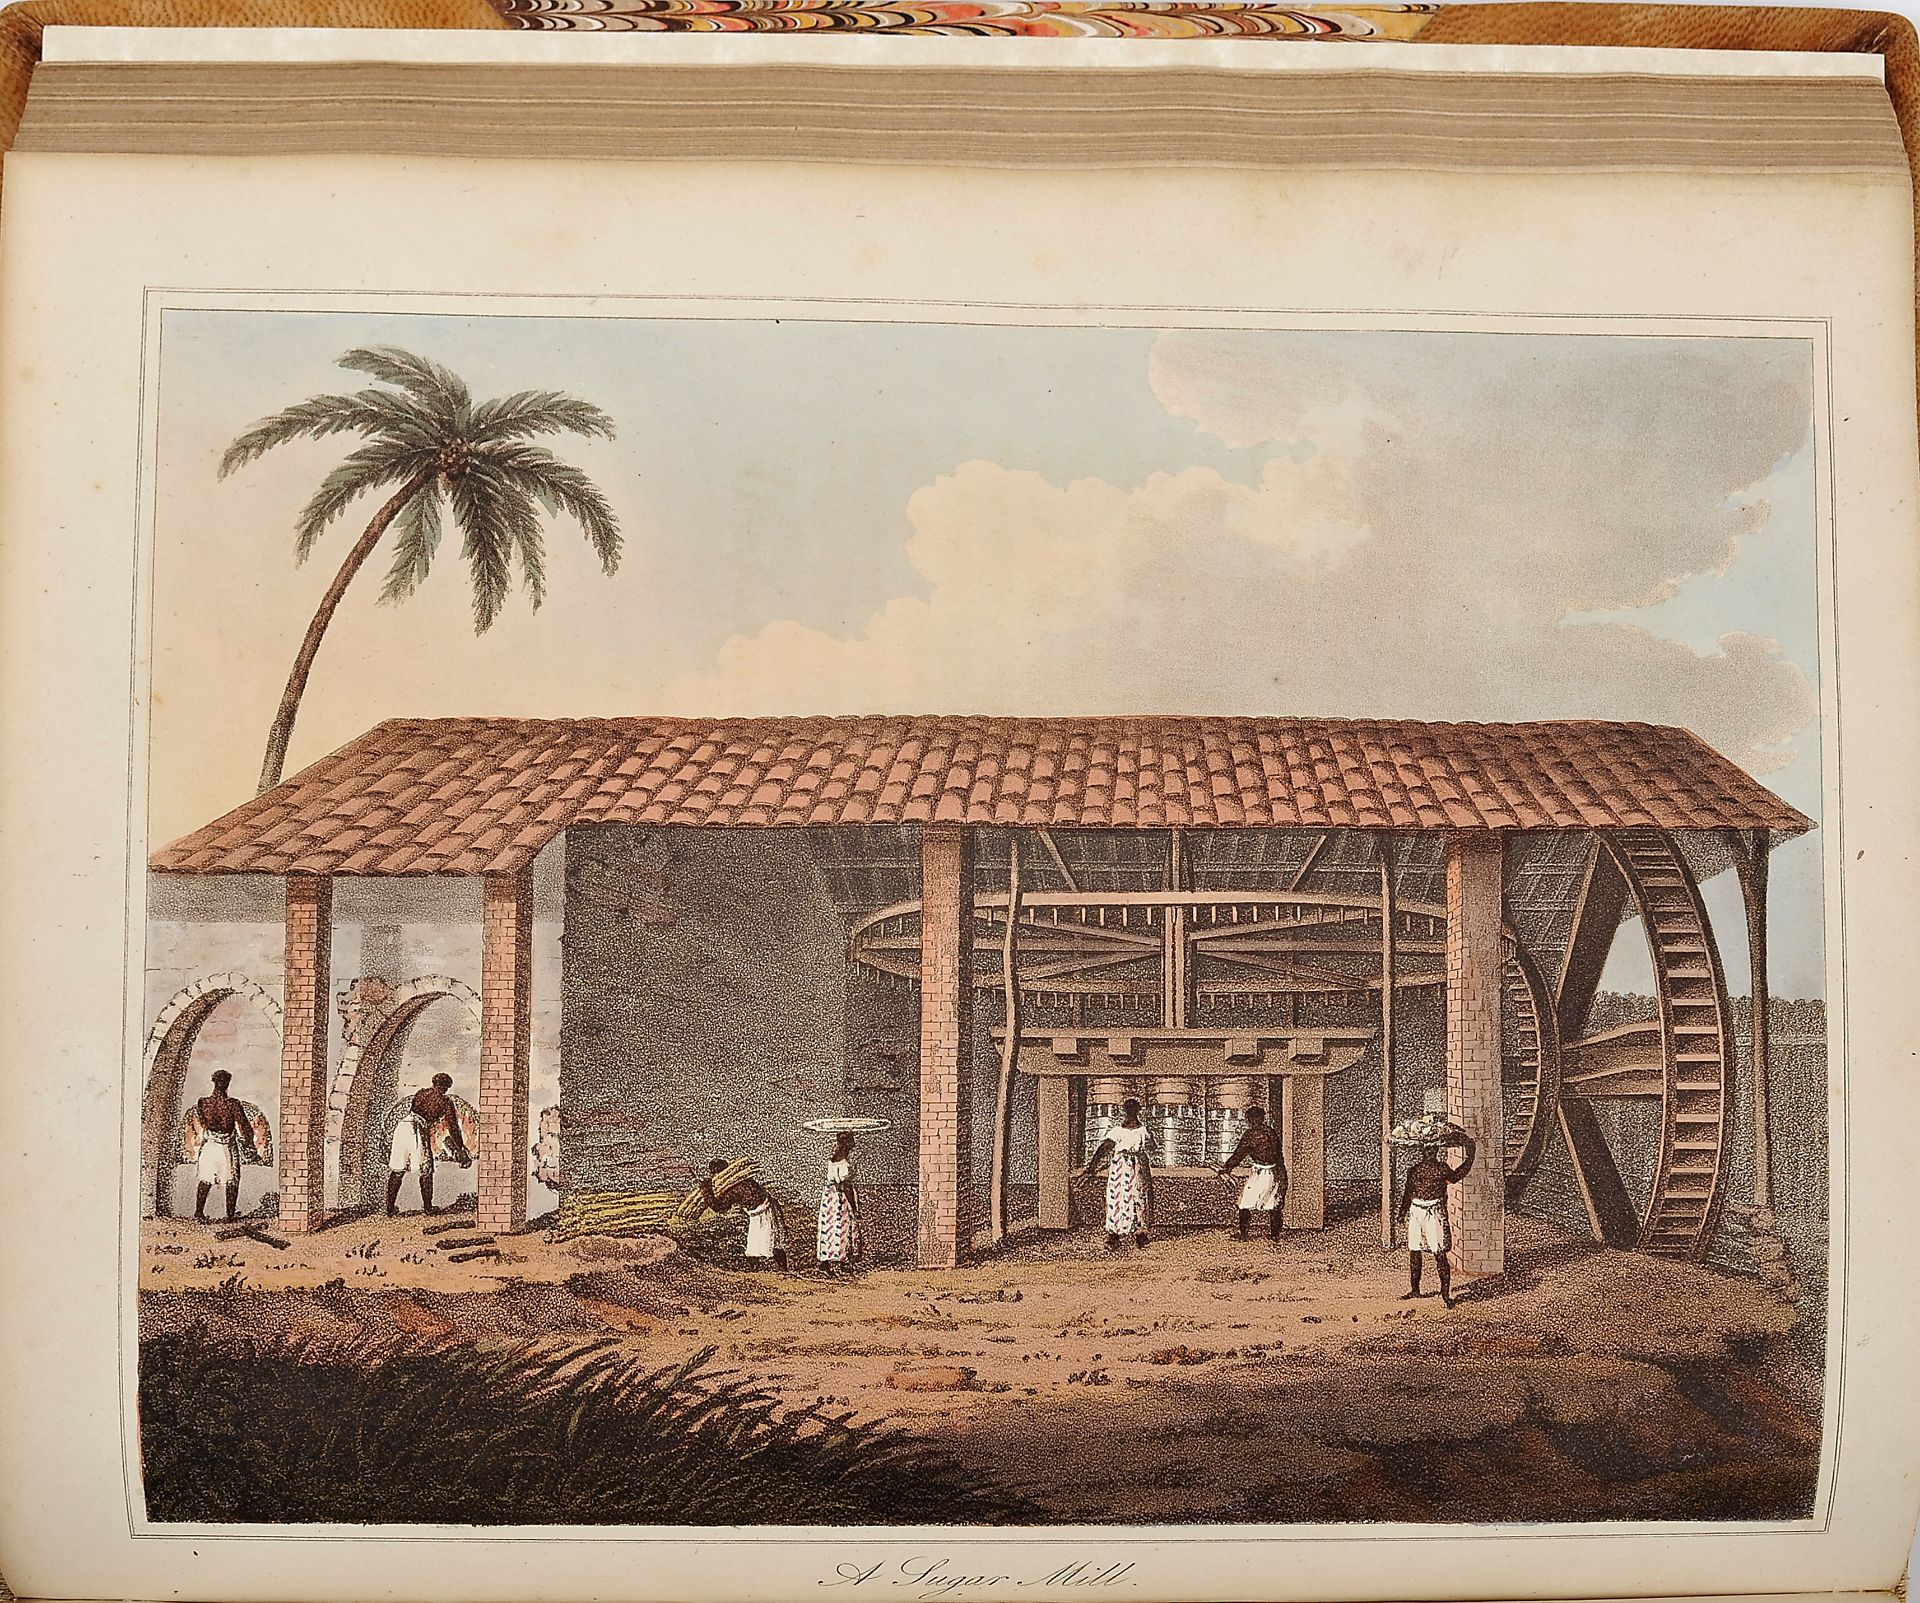 KOSTER, Henry.- Travels in Brazil.- London: Longman, Hurst, Rees, Orme and Brown, 1816.- IX, [3], 50 - Image 5 of 5